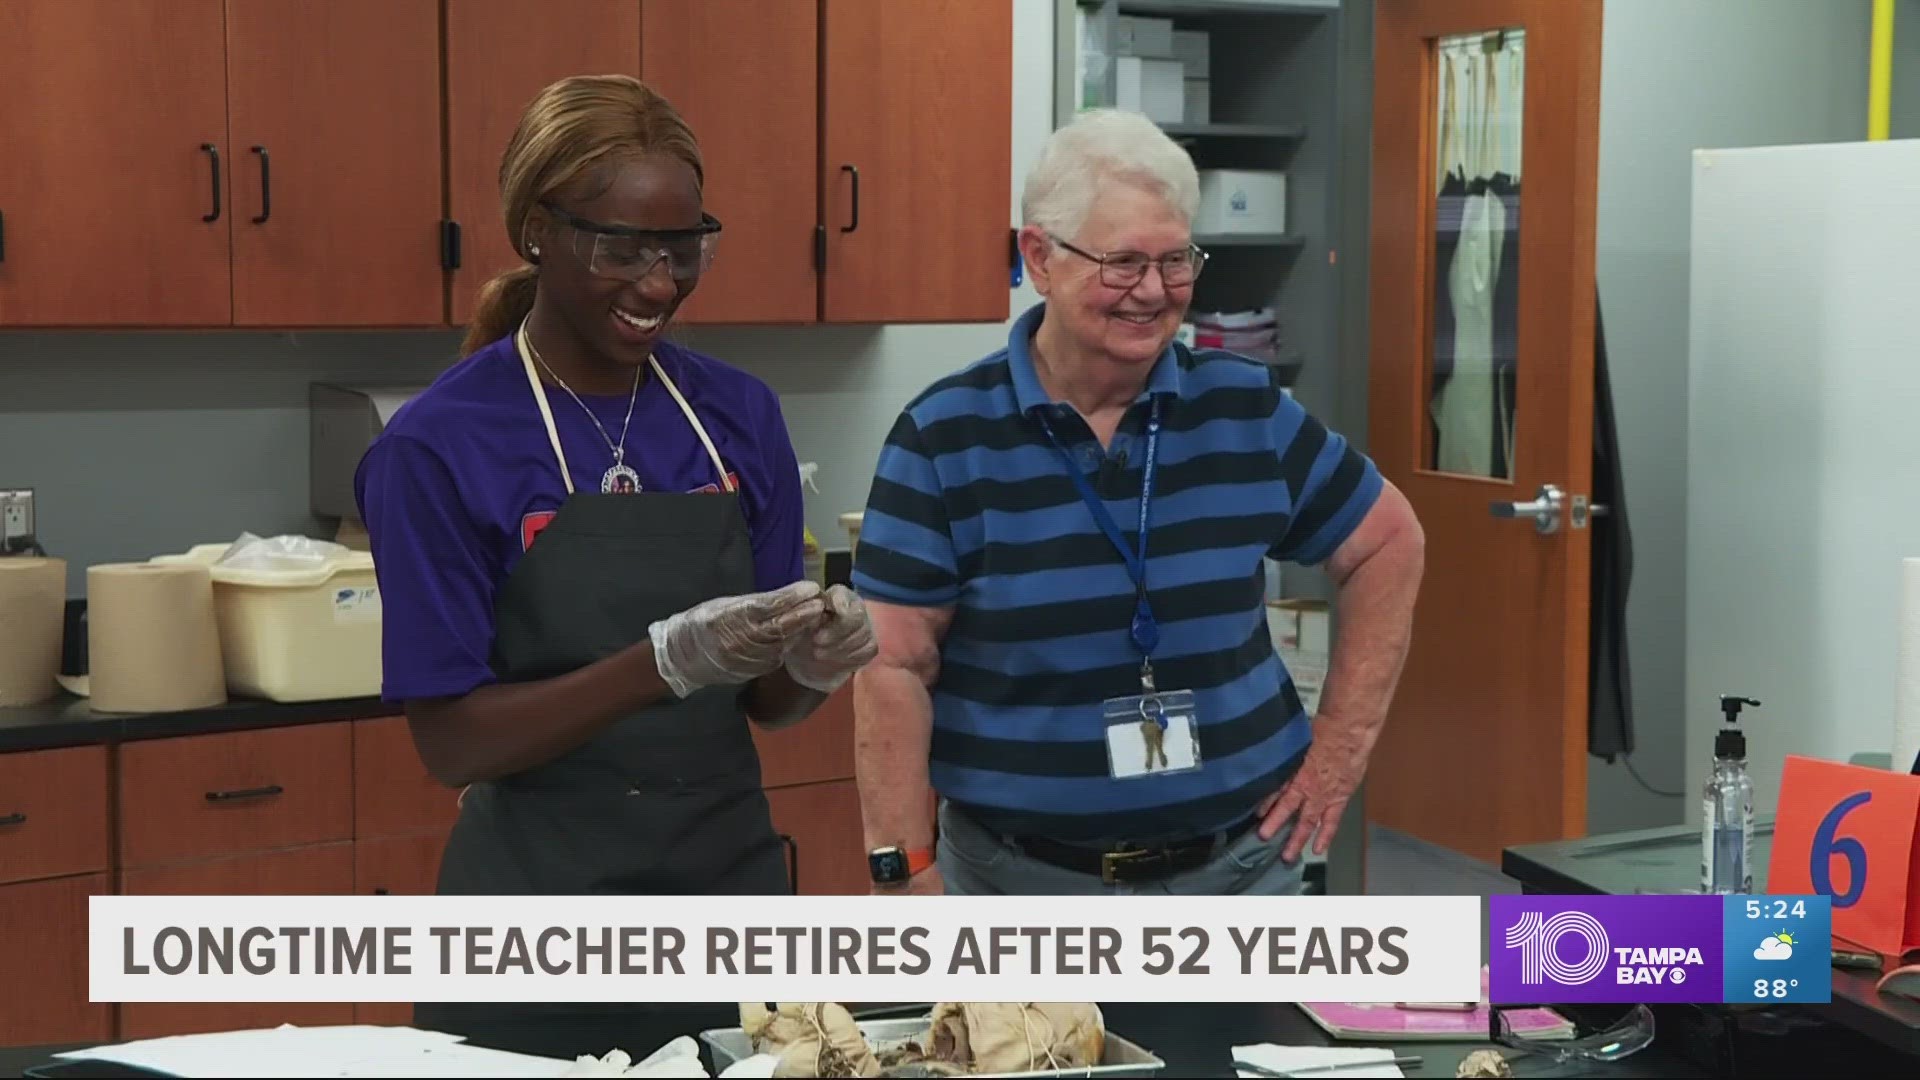 After 52 years of teaching at the same school, Bartow High School's Ms. Allison is retiring next week.